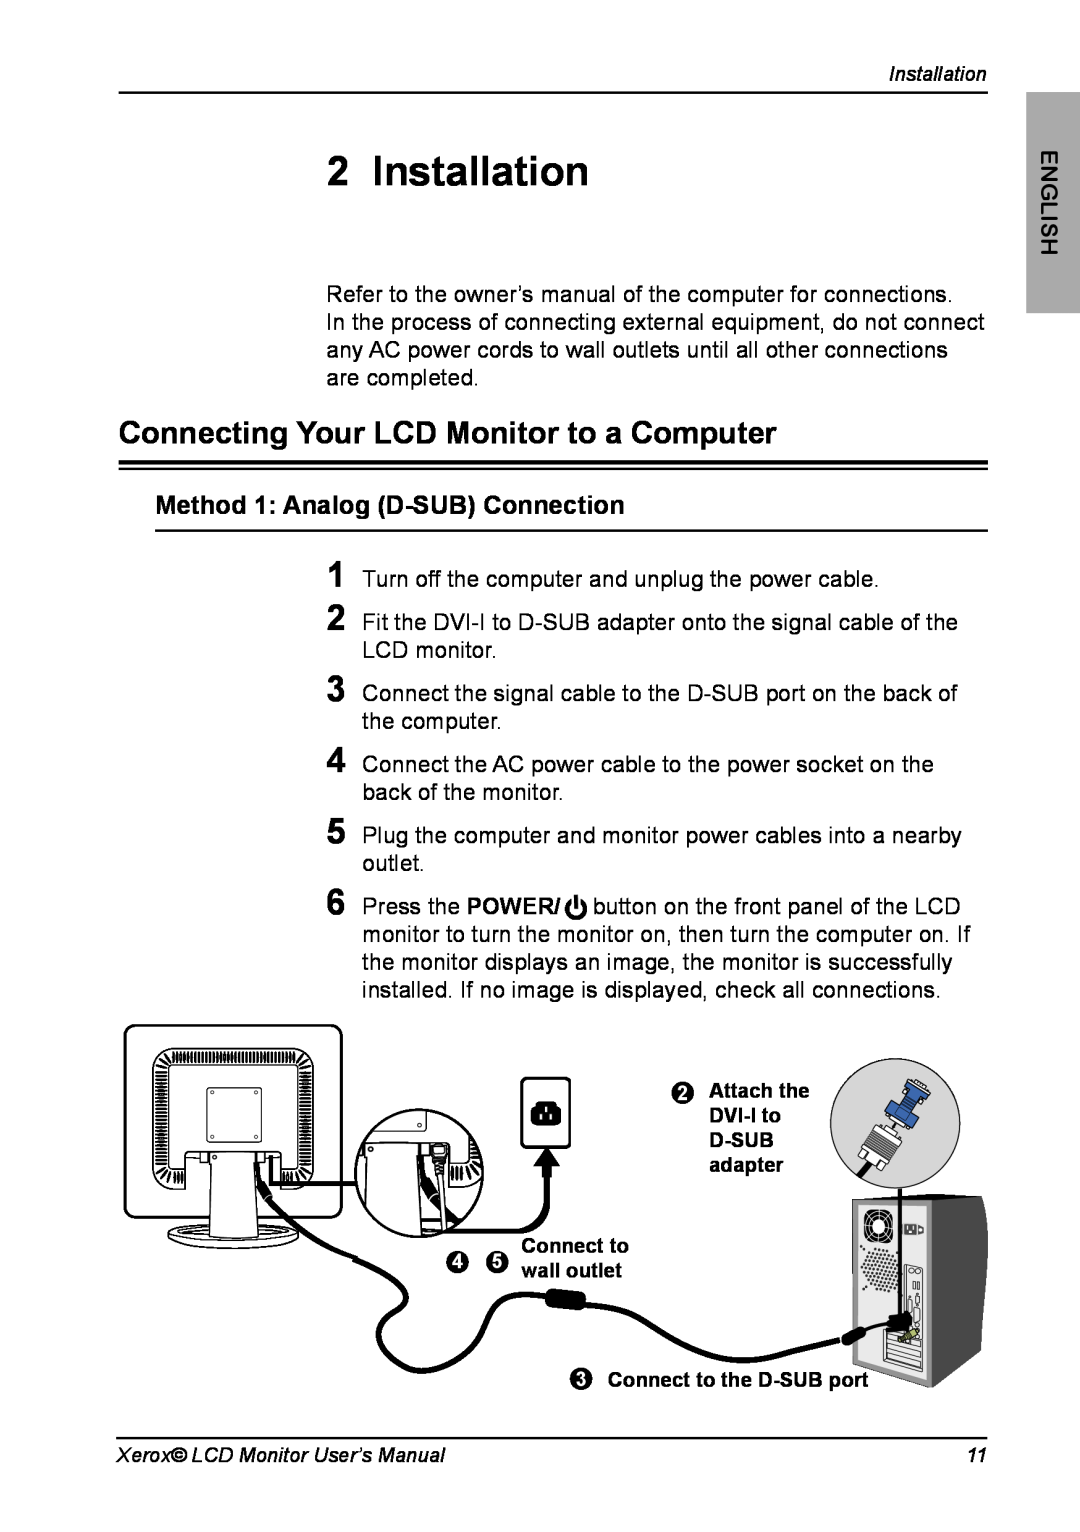 Xerox XA7-19i manual Installation, Connecting Your LCD Monitor to a Computer, Method 1 Analog D-SUB Connection, English 